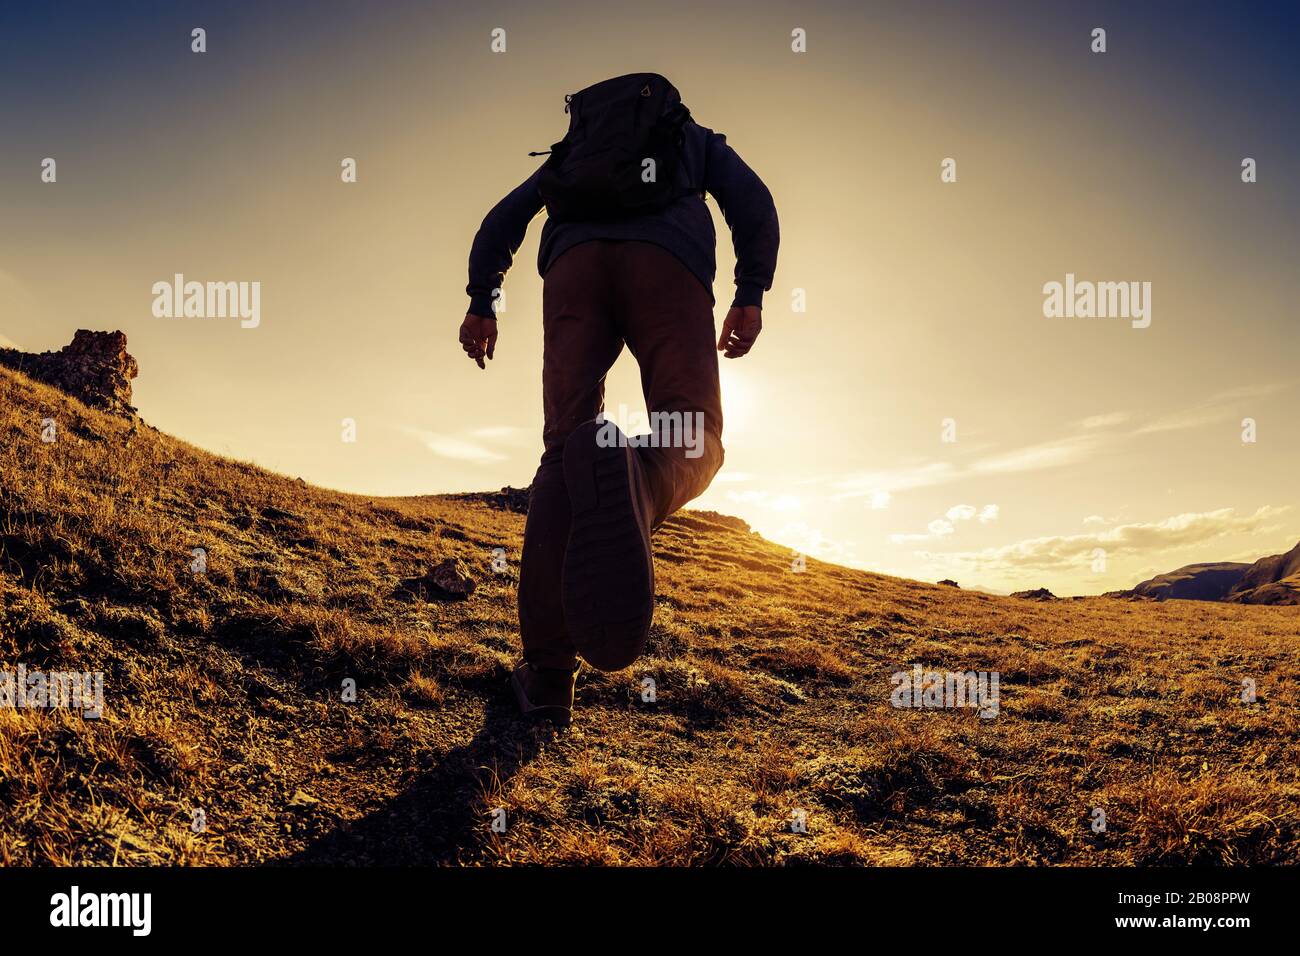 Unrecognized traveler or hiker walks in mountains area at sunset time Stock Photo